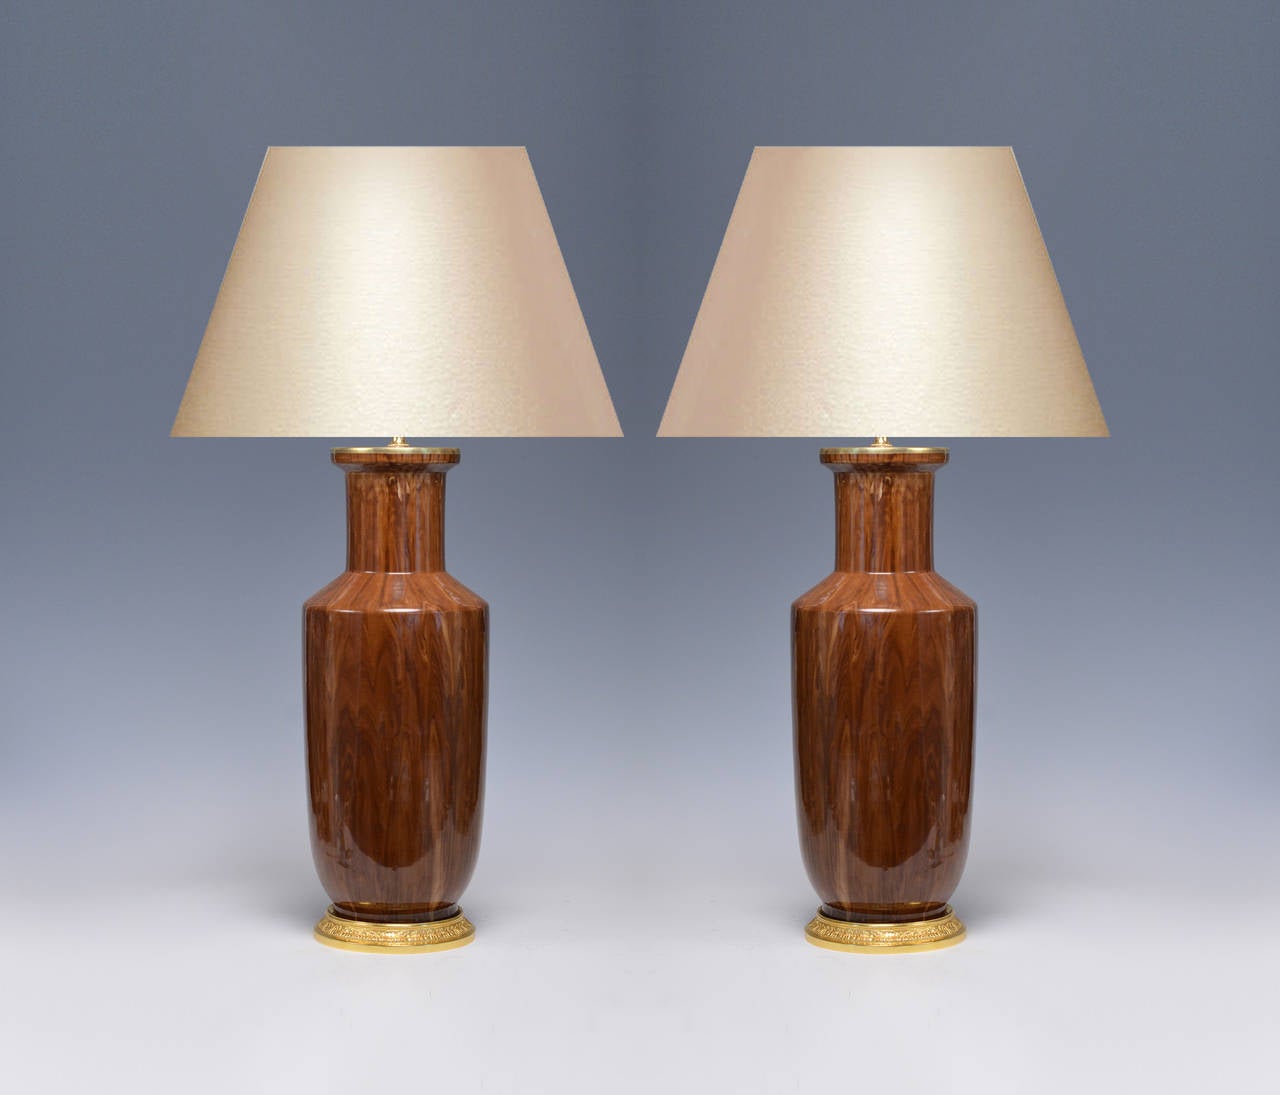 Pair of fine painted wood grain porcelain lamps with gilt brass bases. Measure: 19 3/4